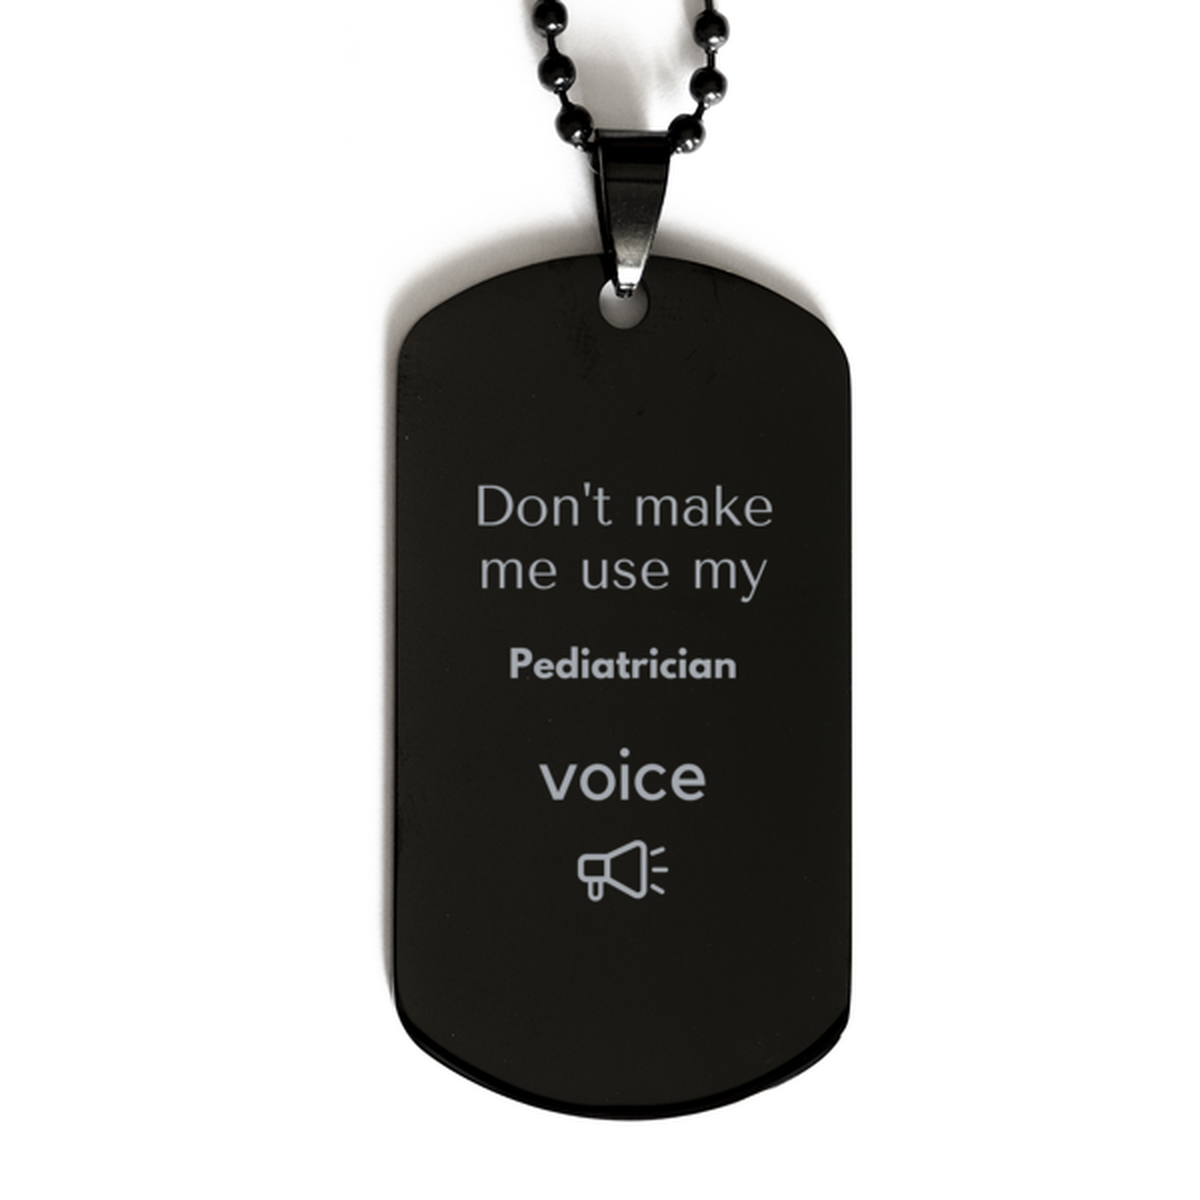 Don't make me use my Pediatrician voice, Sarcasm Pediatrician Gifts, Christmas Pediatrician Black Dog Tag Birthday Unique Gifts For Pediatrician Coworkers, Men, Women, Colleague, Friends